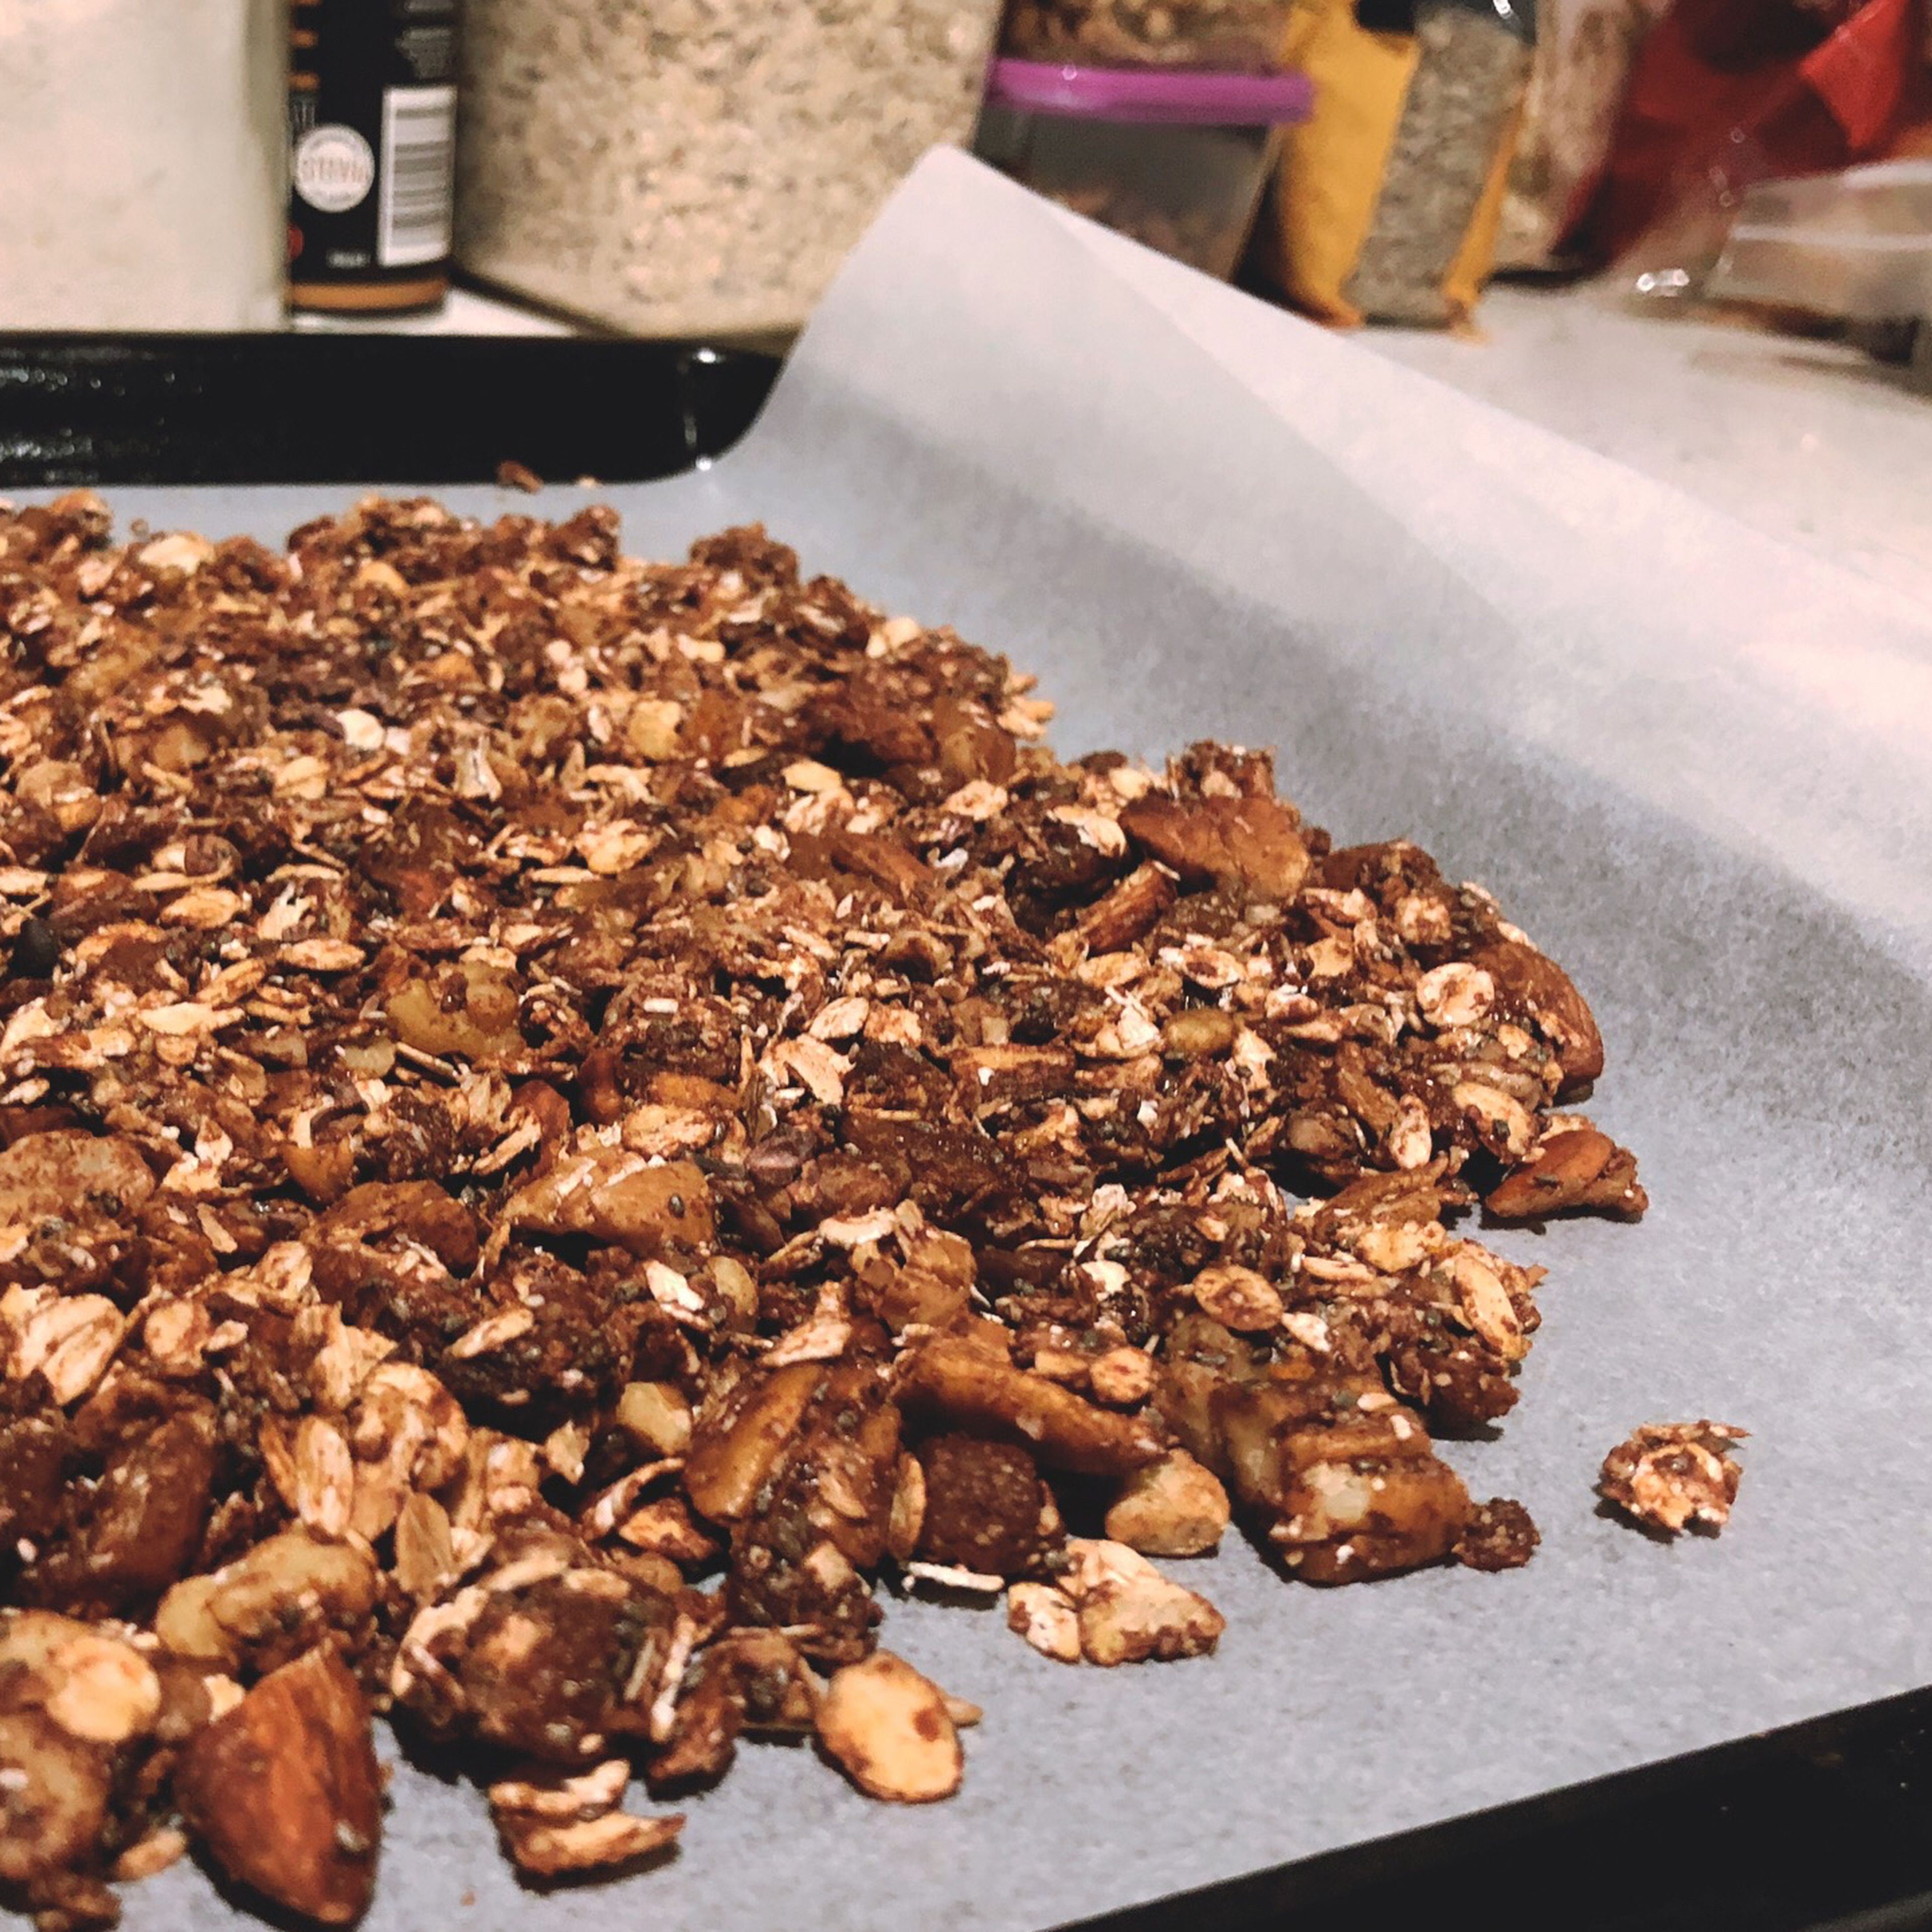 Spread mixture evenly on to the parchment paper and sprinkle some cacao nibs. Bake it in the preheated over at 150 C for approximately 15 minutes.